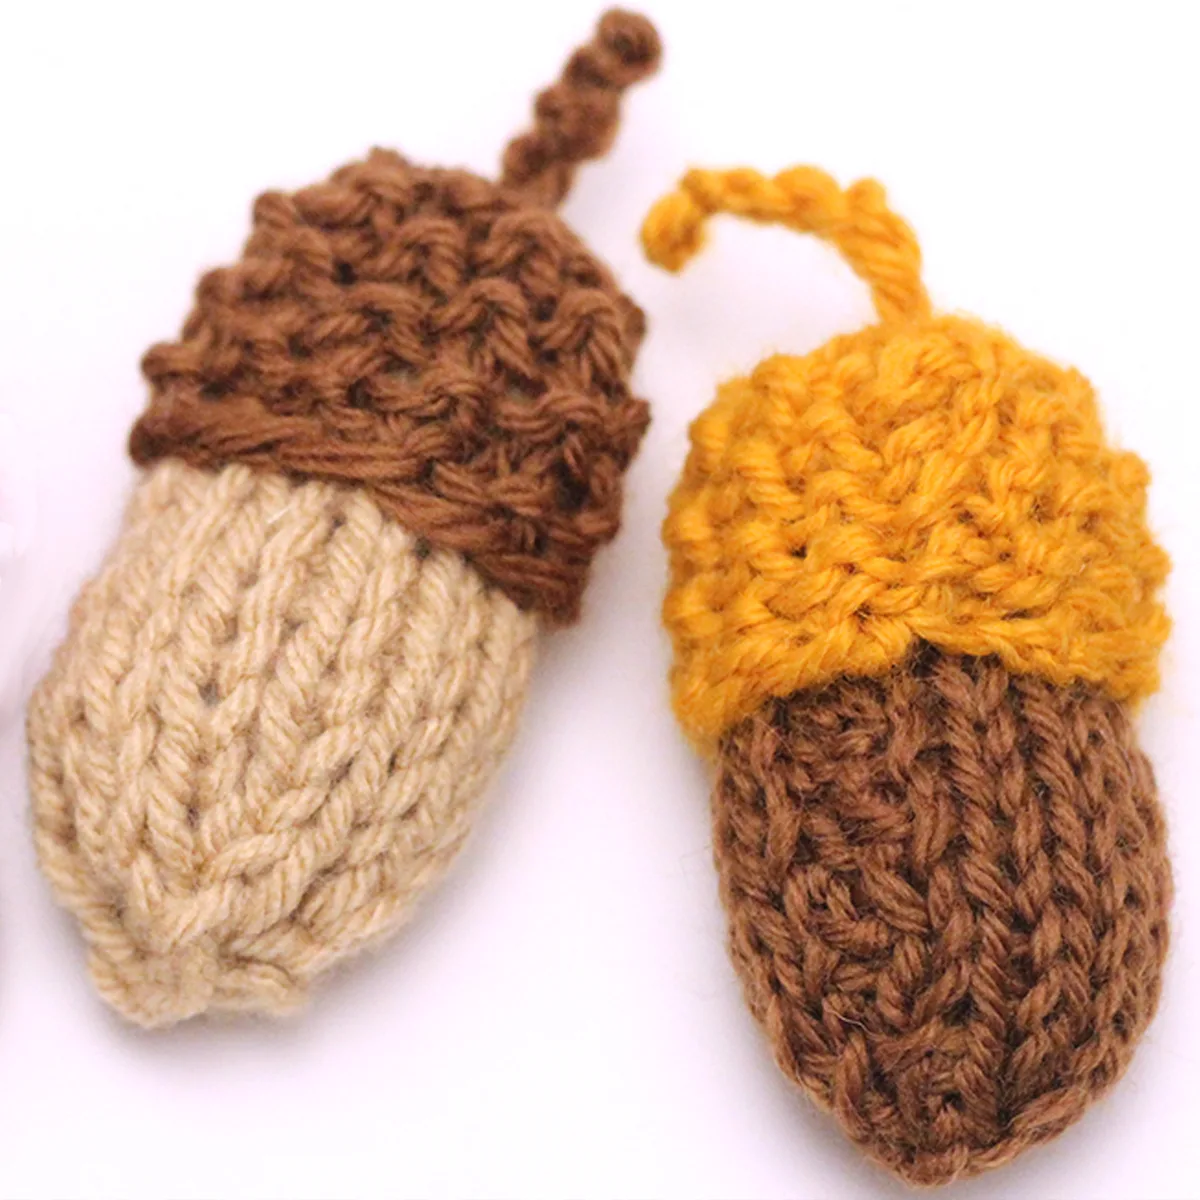 Two knitted acorn softies in brown, yellow, and beige yarn colors on a white background.